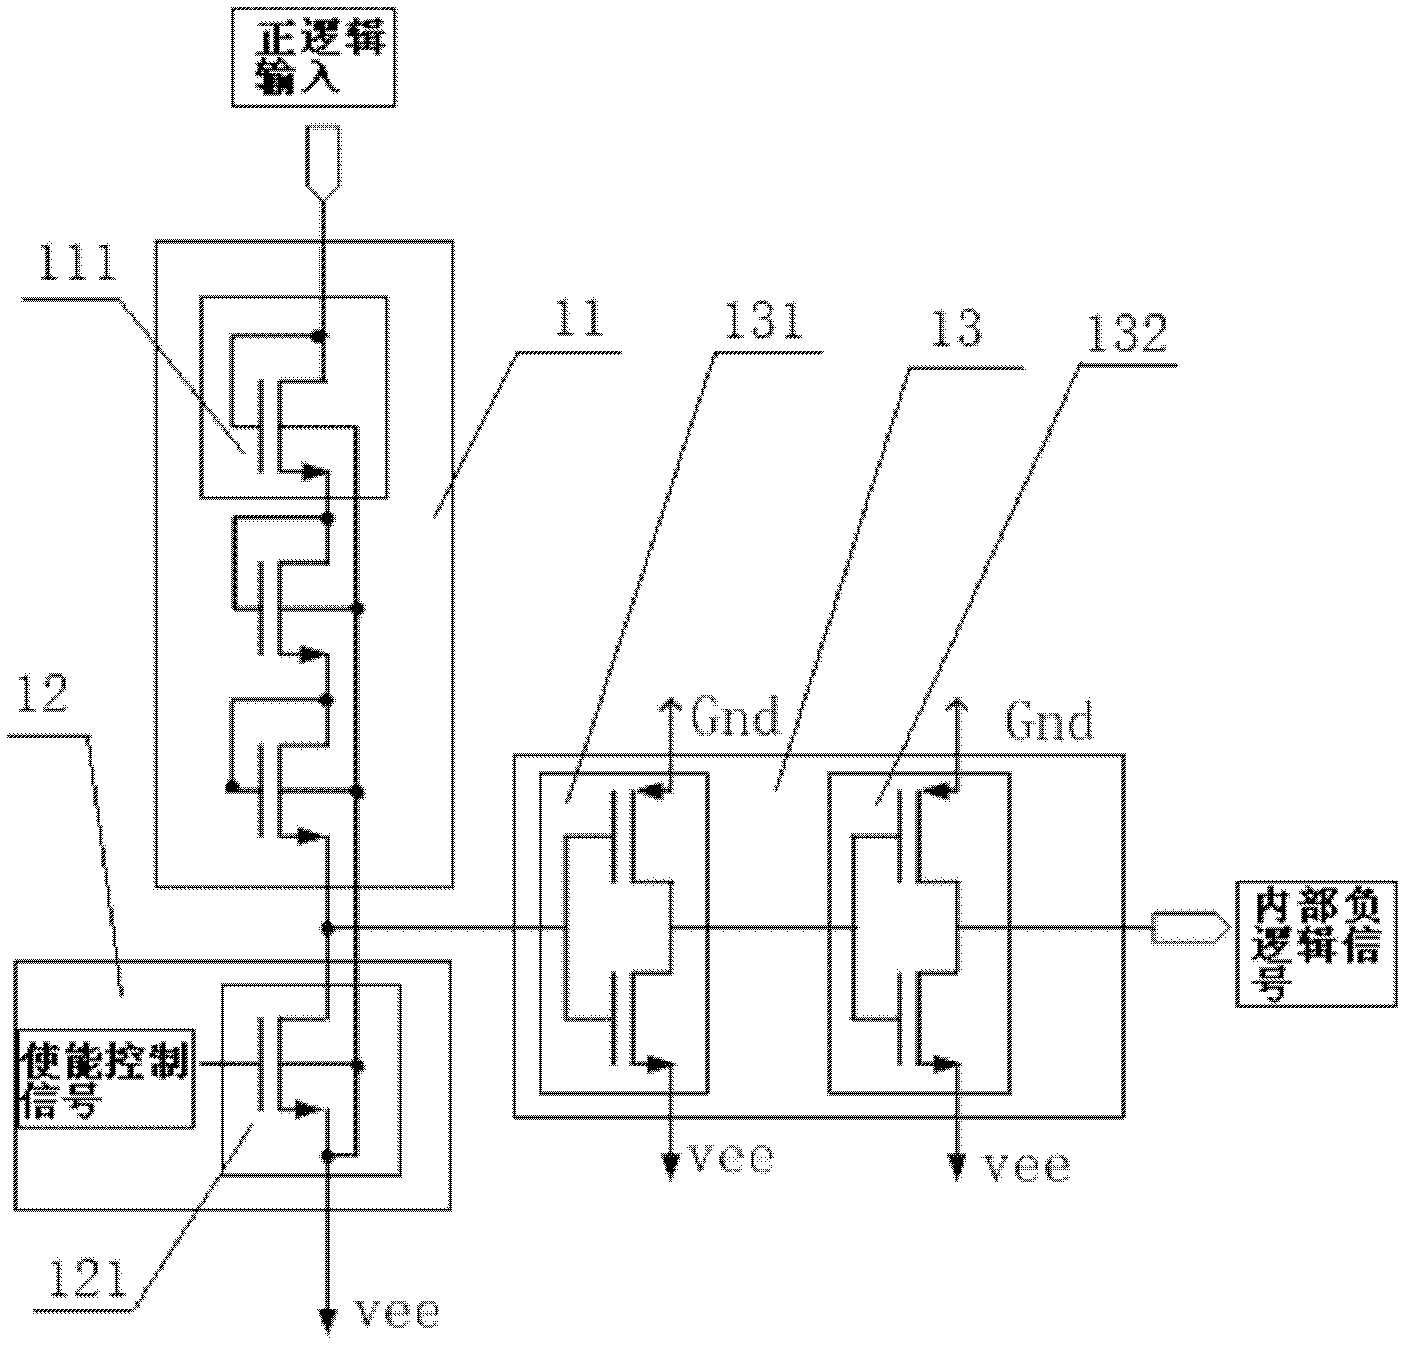 Single-power-supply positive and negative logic conversion circuit